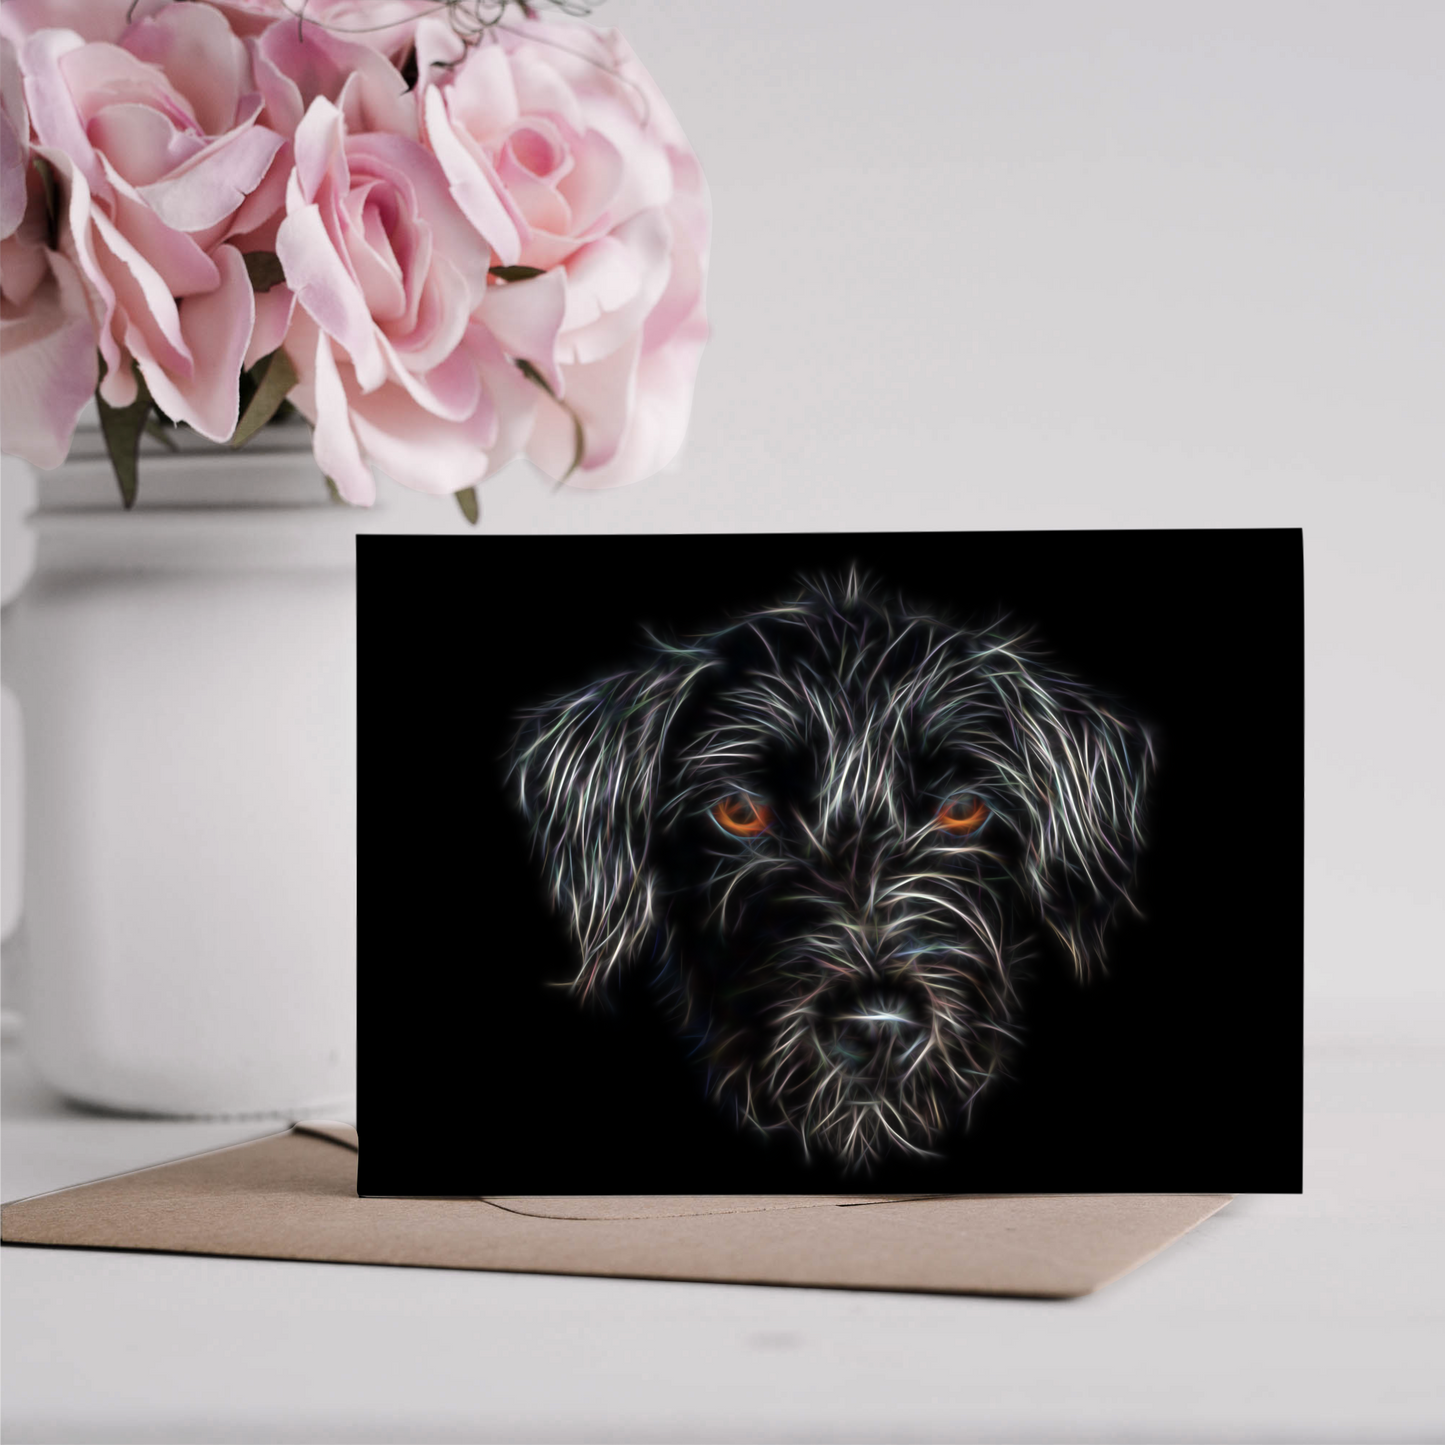 Black Jackapoo Greeting Card Blank Inside for Birthdays or any other Occasion